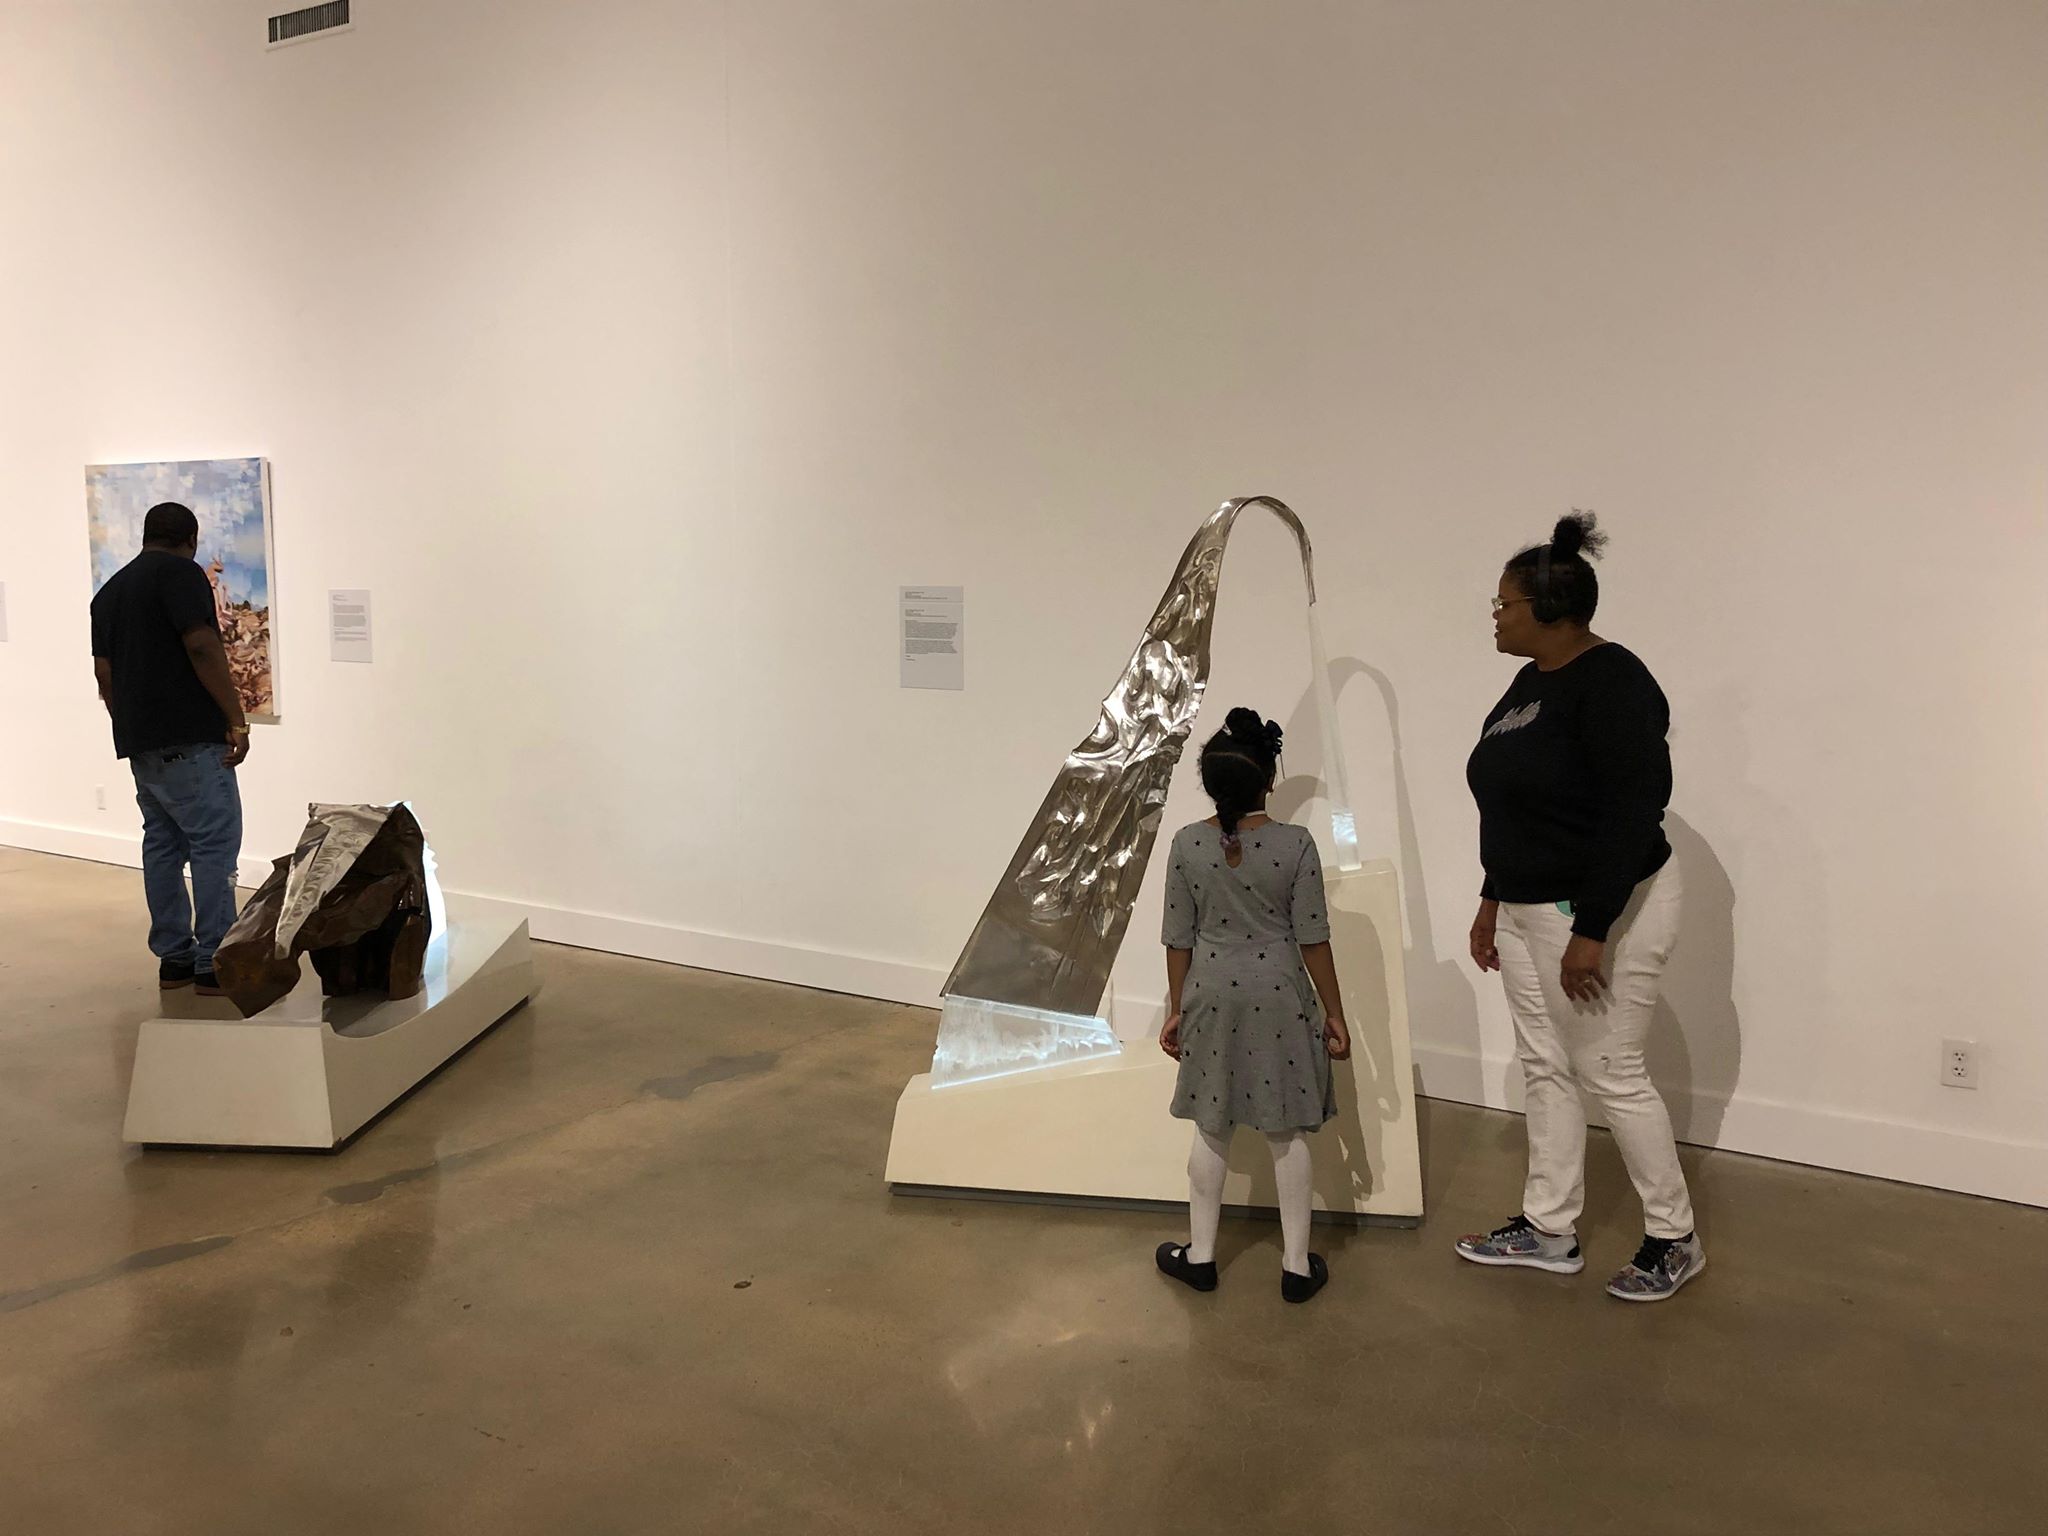 Megan Savare looks on as daughter Christina shares her favorite piece of the “Dear Artist” installation - a sculpture by John Carl Marshall titled “Glacier”. (Scarlet Ponder)